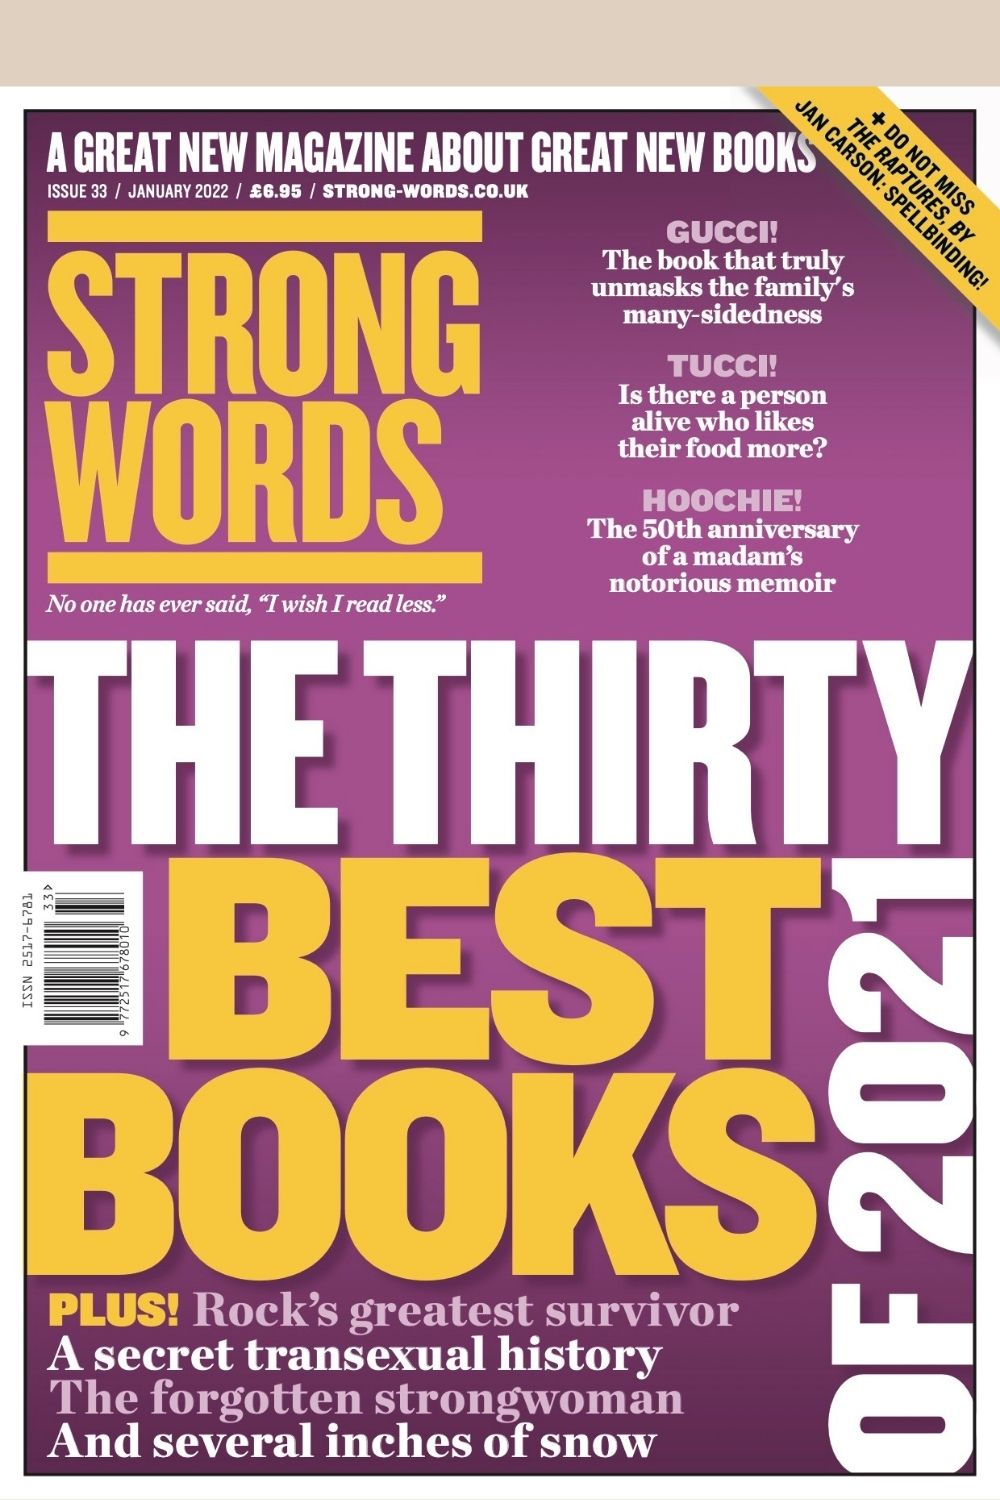 Strong Words Magazine Issue 33